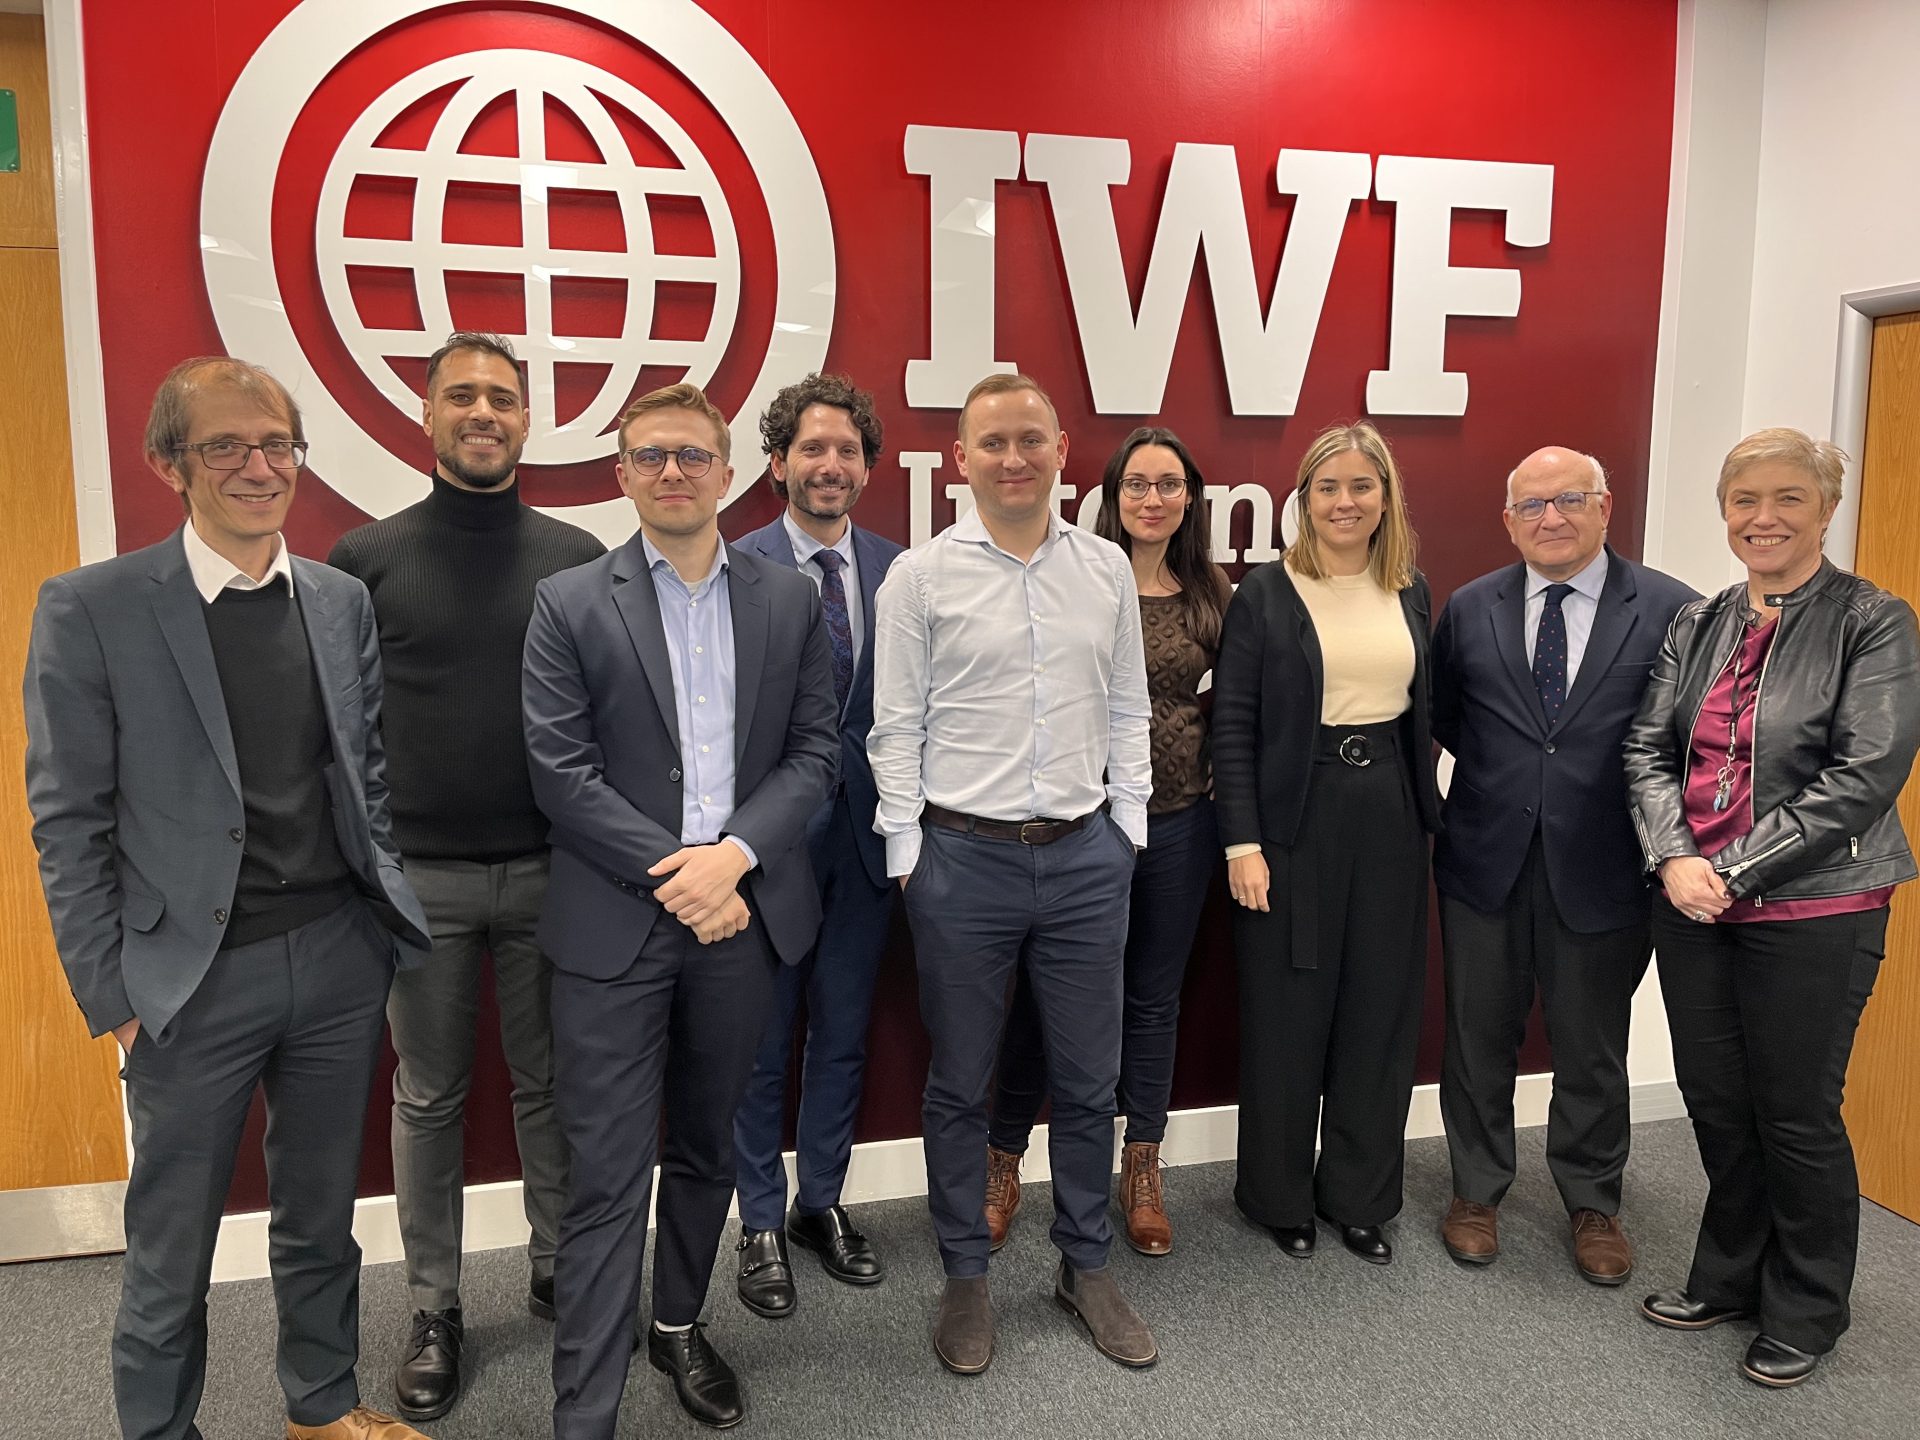 A group photo of attendees at MEP visit to the IWF office, showing, from left, Deputy Director at the UK Home Office, Christian Papaleontiou; Parliamentary Assistant to Niyazi Kizilyürek MEP, Hakan Choban; IWF Policy and Public Affairs Executive, Jonah Thompson; Secretary General of the European Parliament’s Child Rights Intergroup, Emilio Puccio; UK Home Office Tackling Child Sexual Abuse Unit, Rob Corr; Parliamentary Assistant to Lena Dupont MEP, Anastasija Ore; Parliamentary Assistant to Javier Zarzalejos MEP, Zoe Nubla; Member of the European Parliament, Javier Zarzalejos; and IWF Chief Executive, Susie Hargreaves OBE